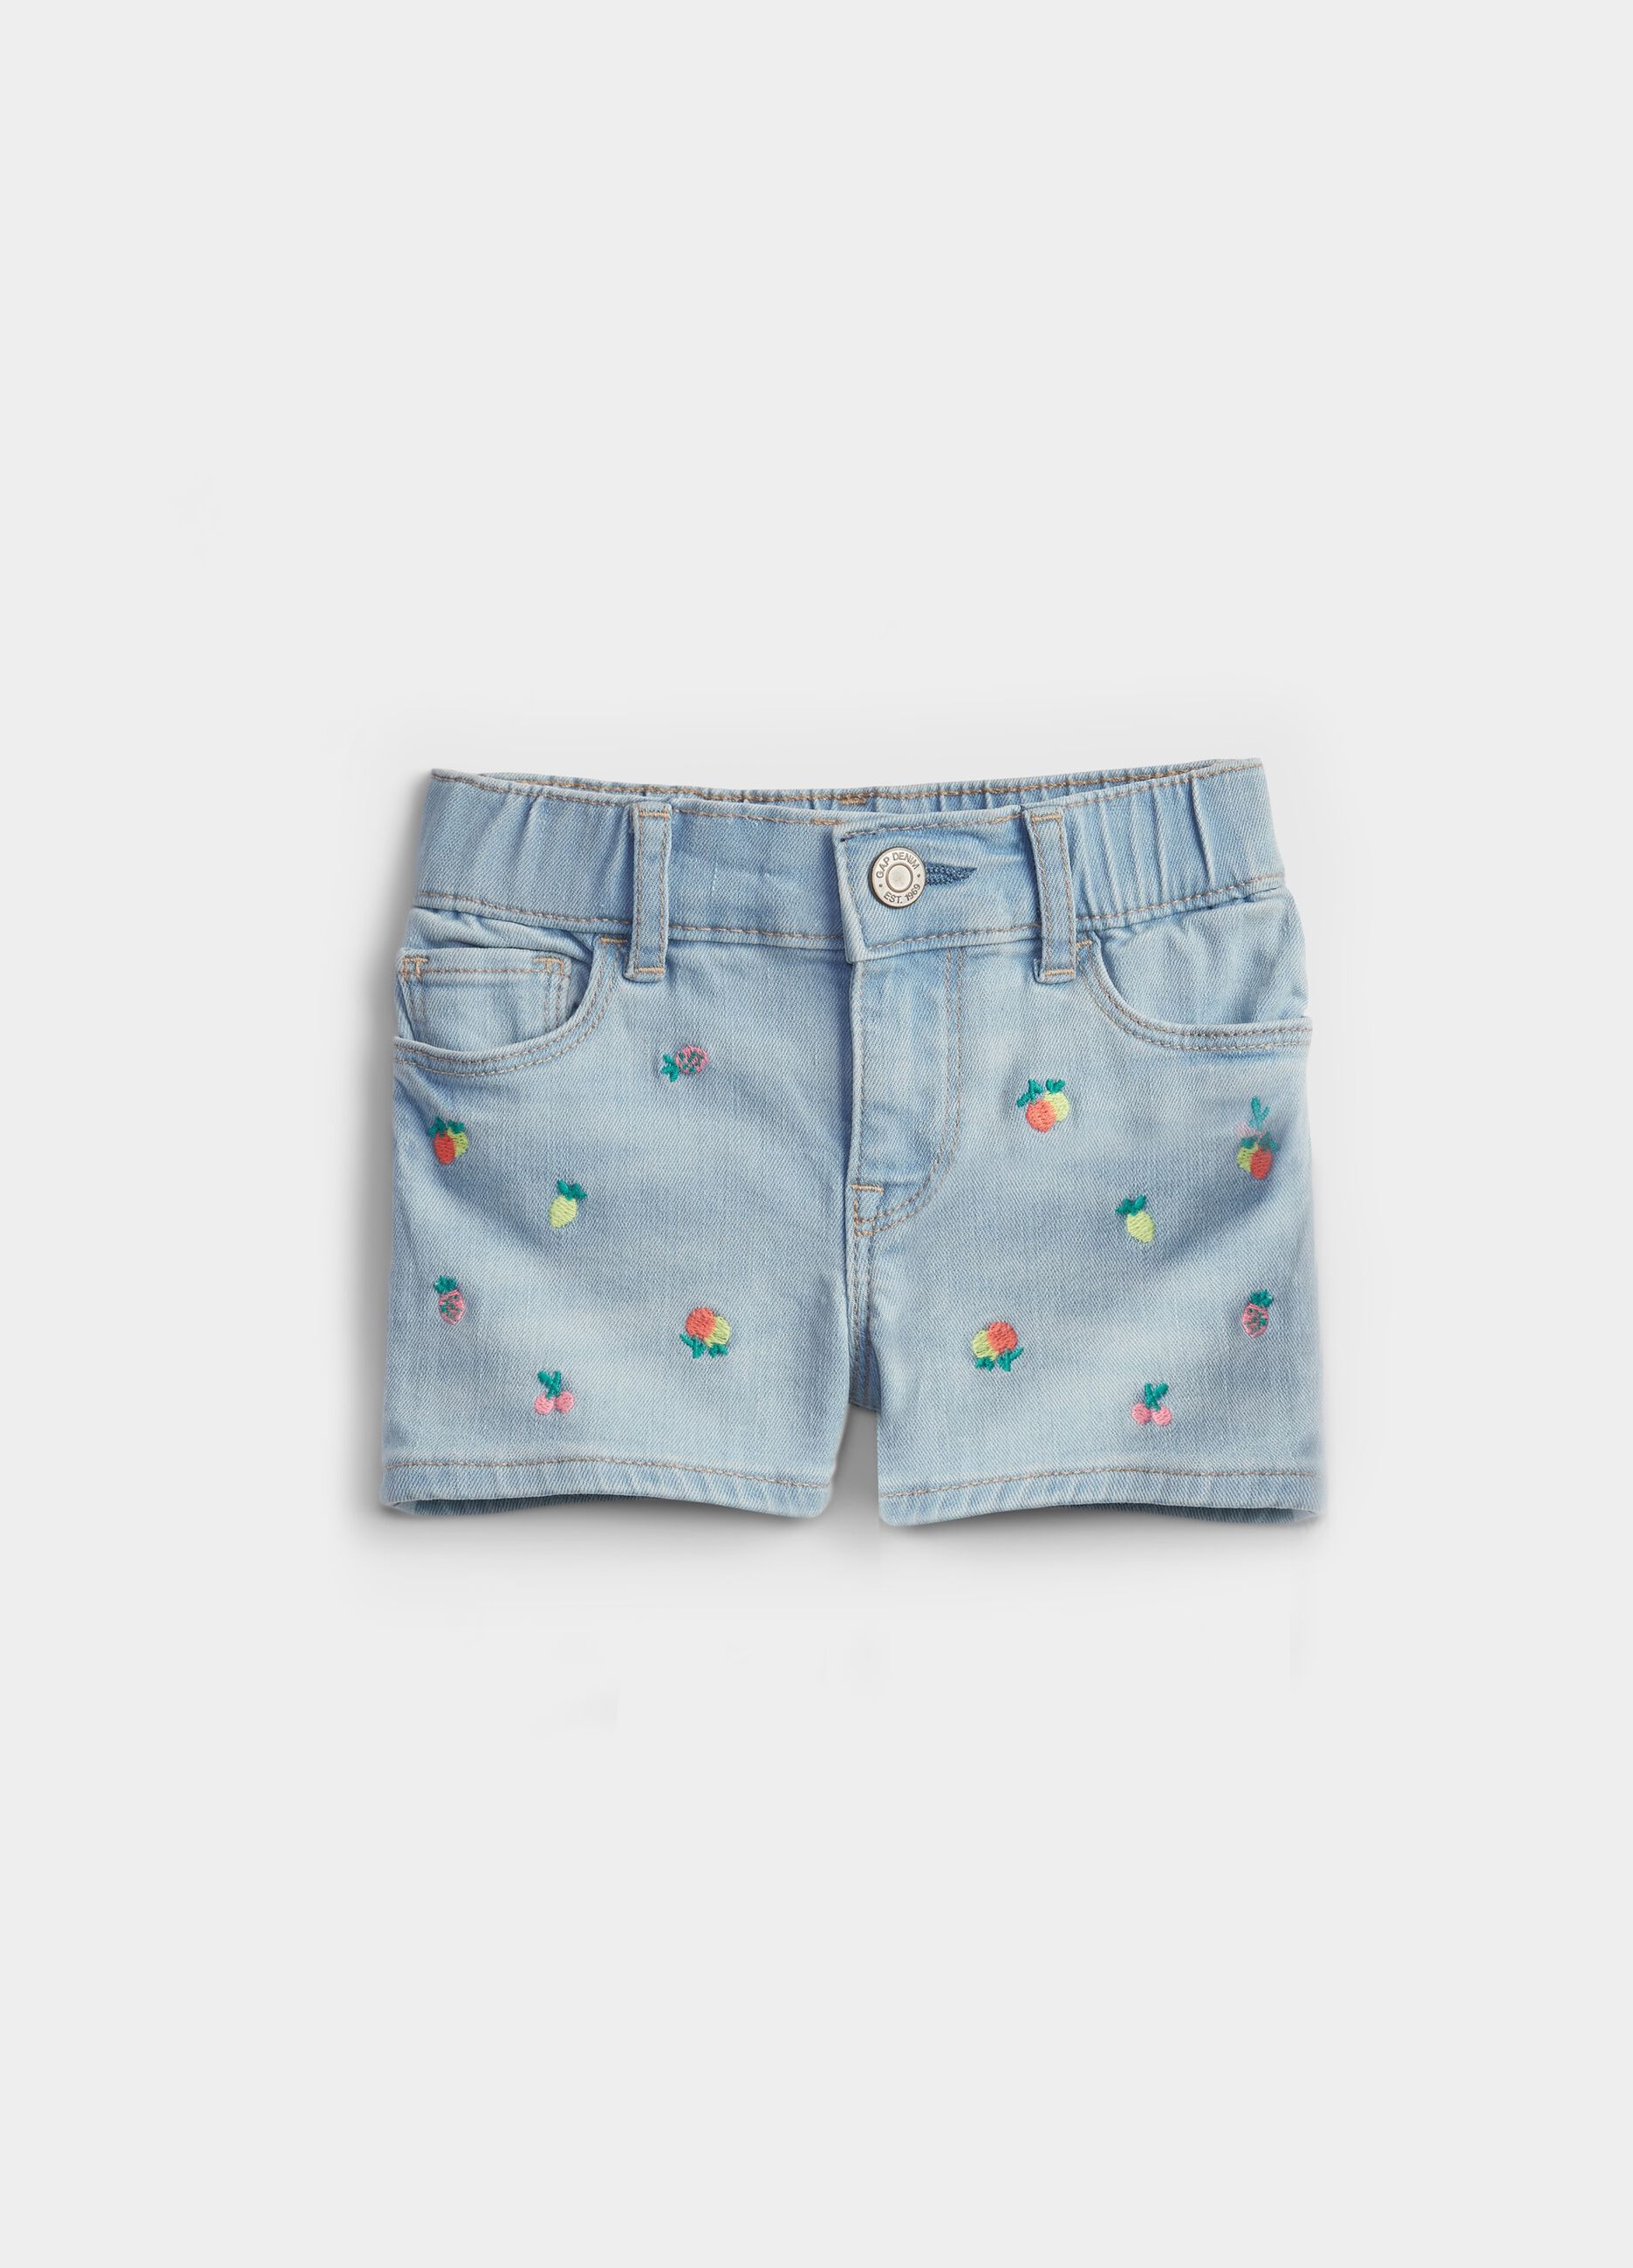 Denim shorts with all-over embroidery